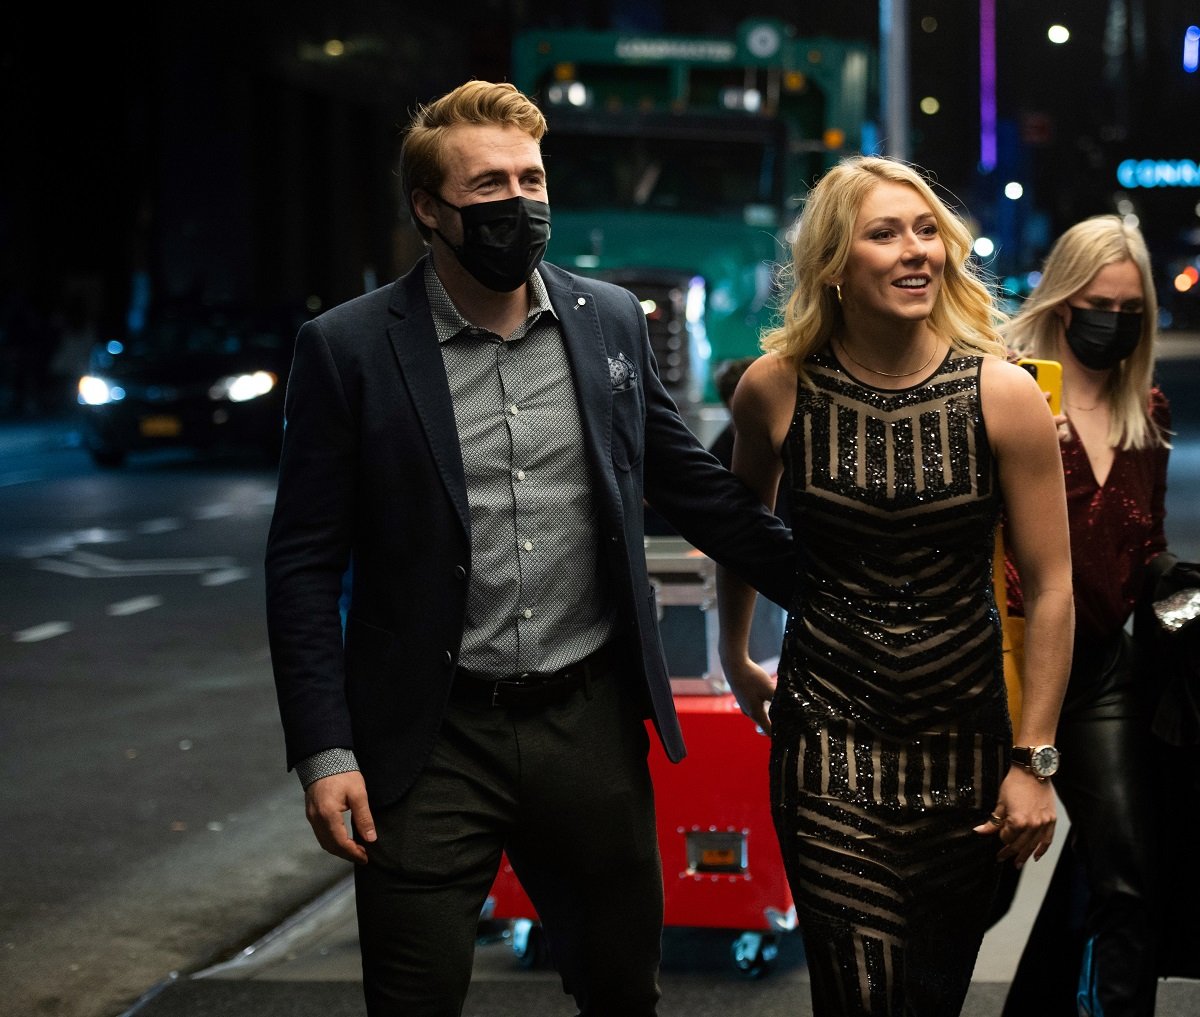 Aleksander Aamodt Kilde and Mikaela Shiffrin walking in New York City to the Gold Medal Gala